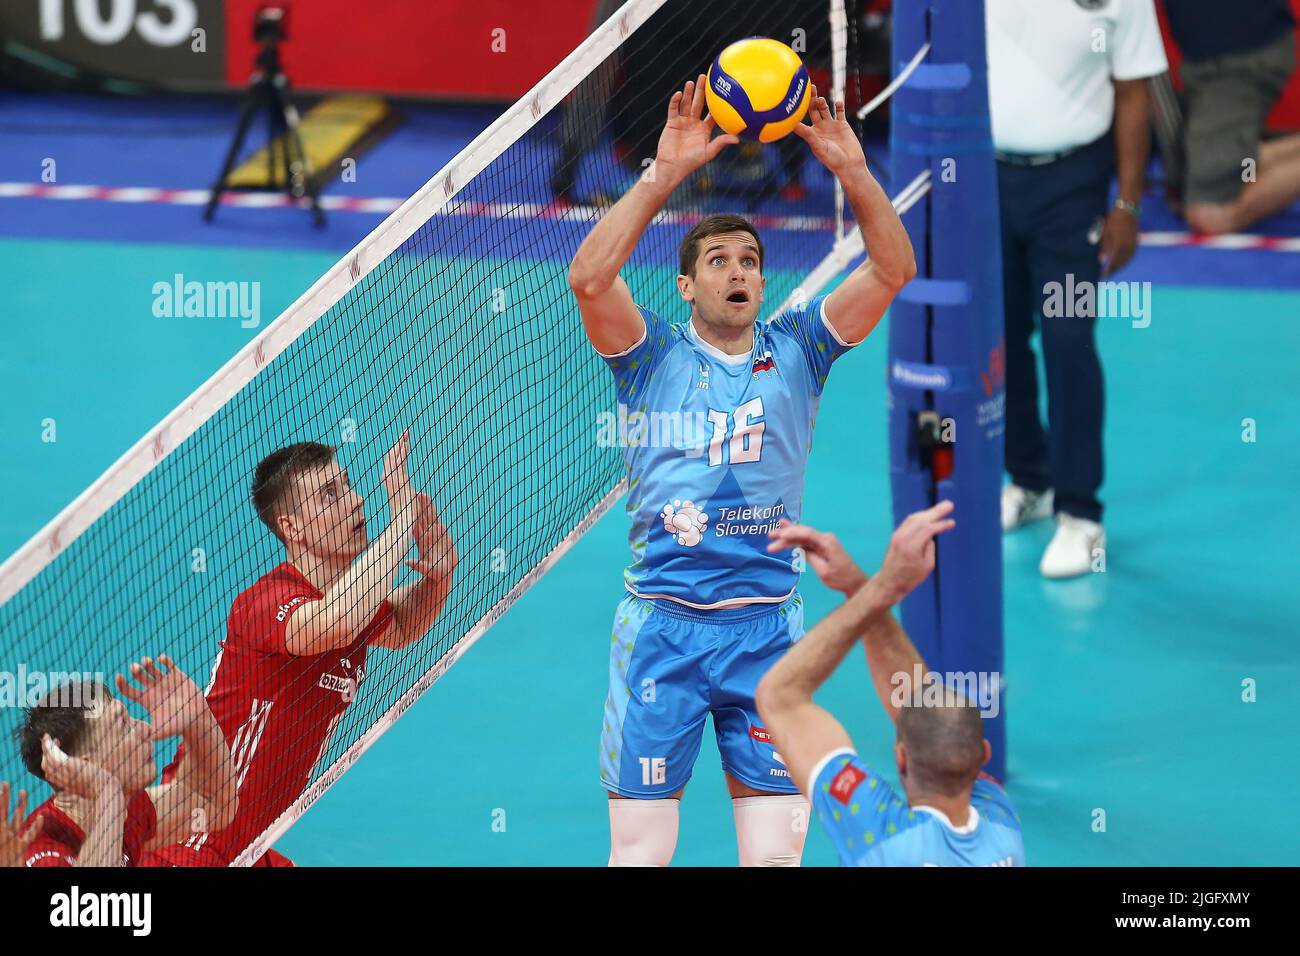 Gdansk, Poland. 10th July, 2022. Kamil Semeniuk (2L) of Poland and Gregor Ropret (2R) of Slovenia during the 2022 men's FIVB Volleyball Nations League match between Poland and Slovenia in Gdansk, Poland, 10 July 2022. Credit: PAP/Alamy Live News Stock Photo